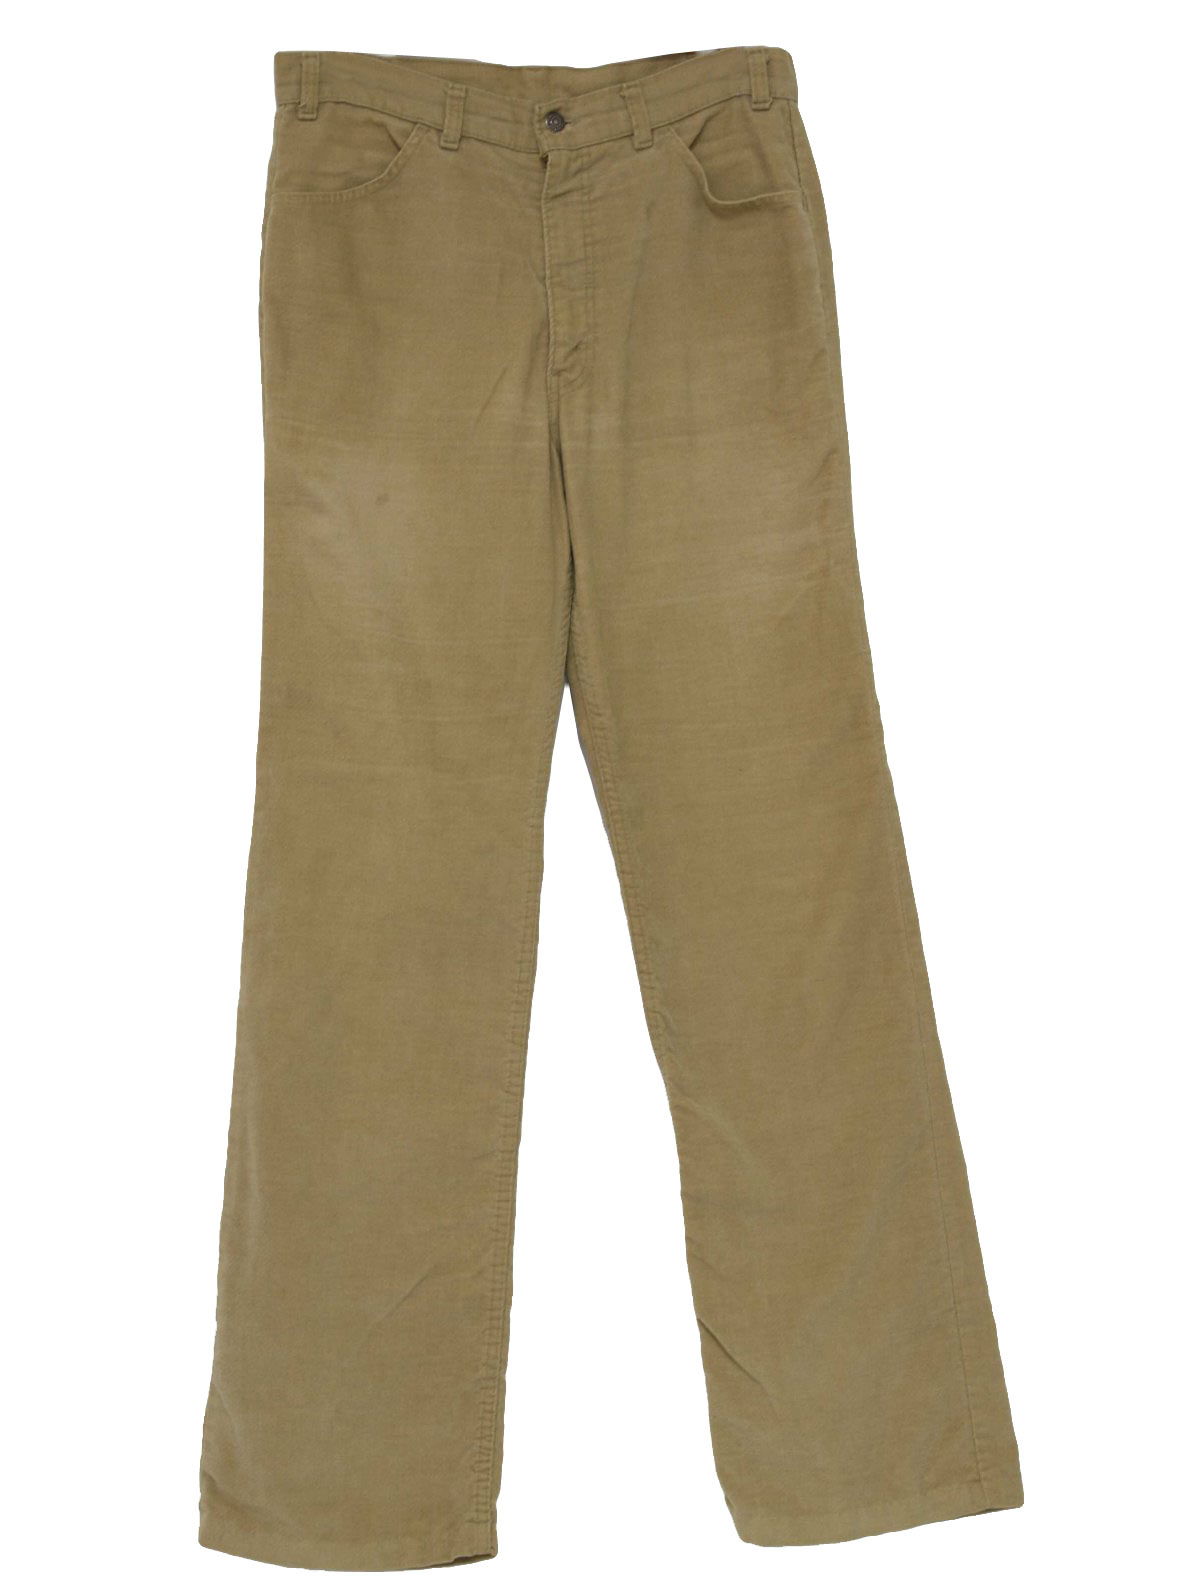 Vintage Levis Seventies Flared Pants / Flares: 70s -Levis- Mens tan sheared  cotton polyester corduroy, 4-pocket jeans-cut cords flared flares pants  with fancy stiching on back pockets, metal zipper and button closure (